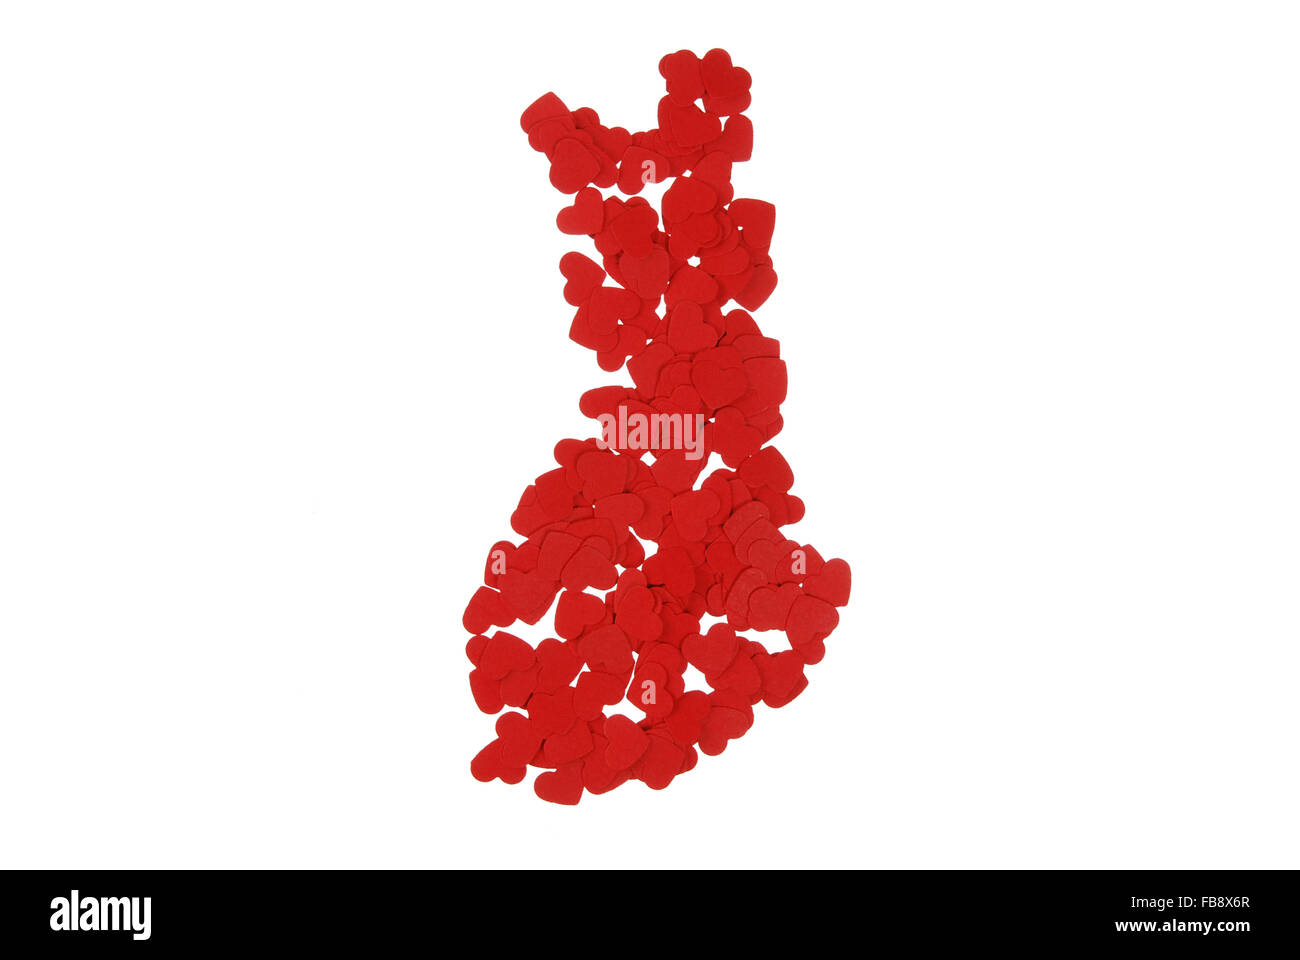 contour of the Finland built of small red hearts on a white background Stock Photo